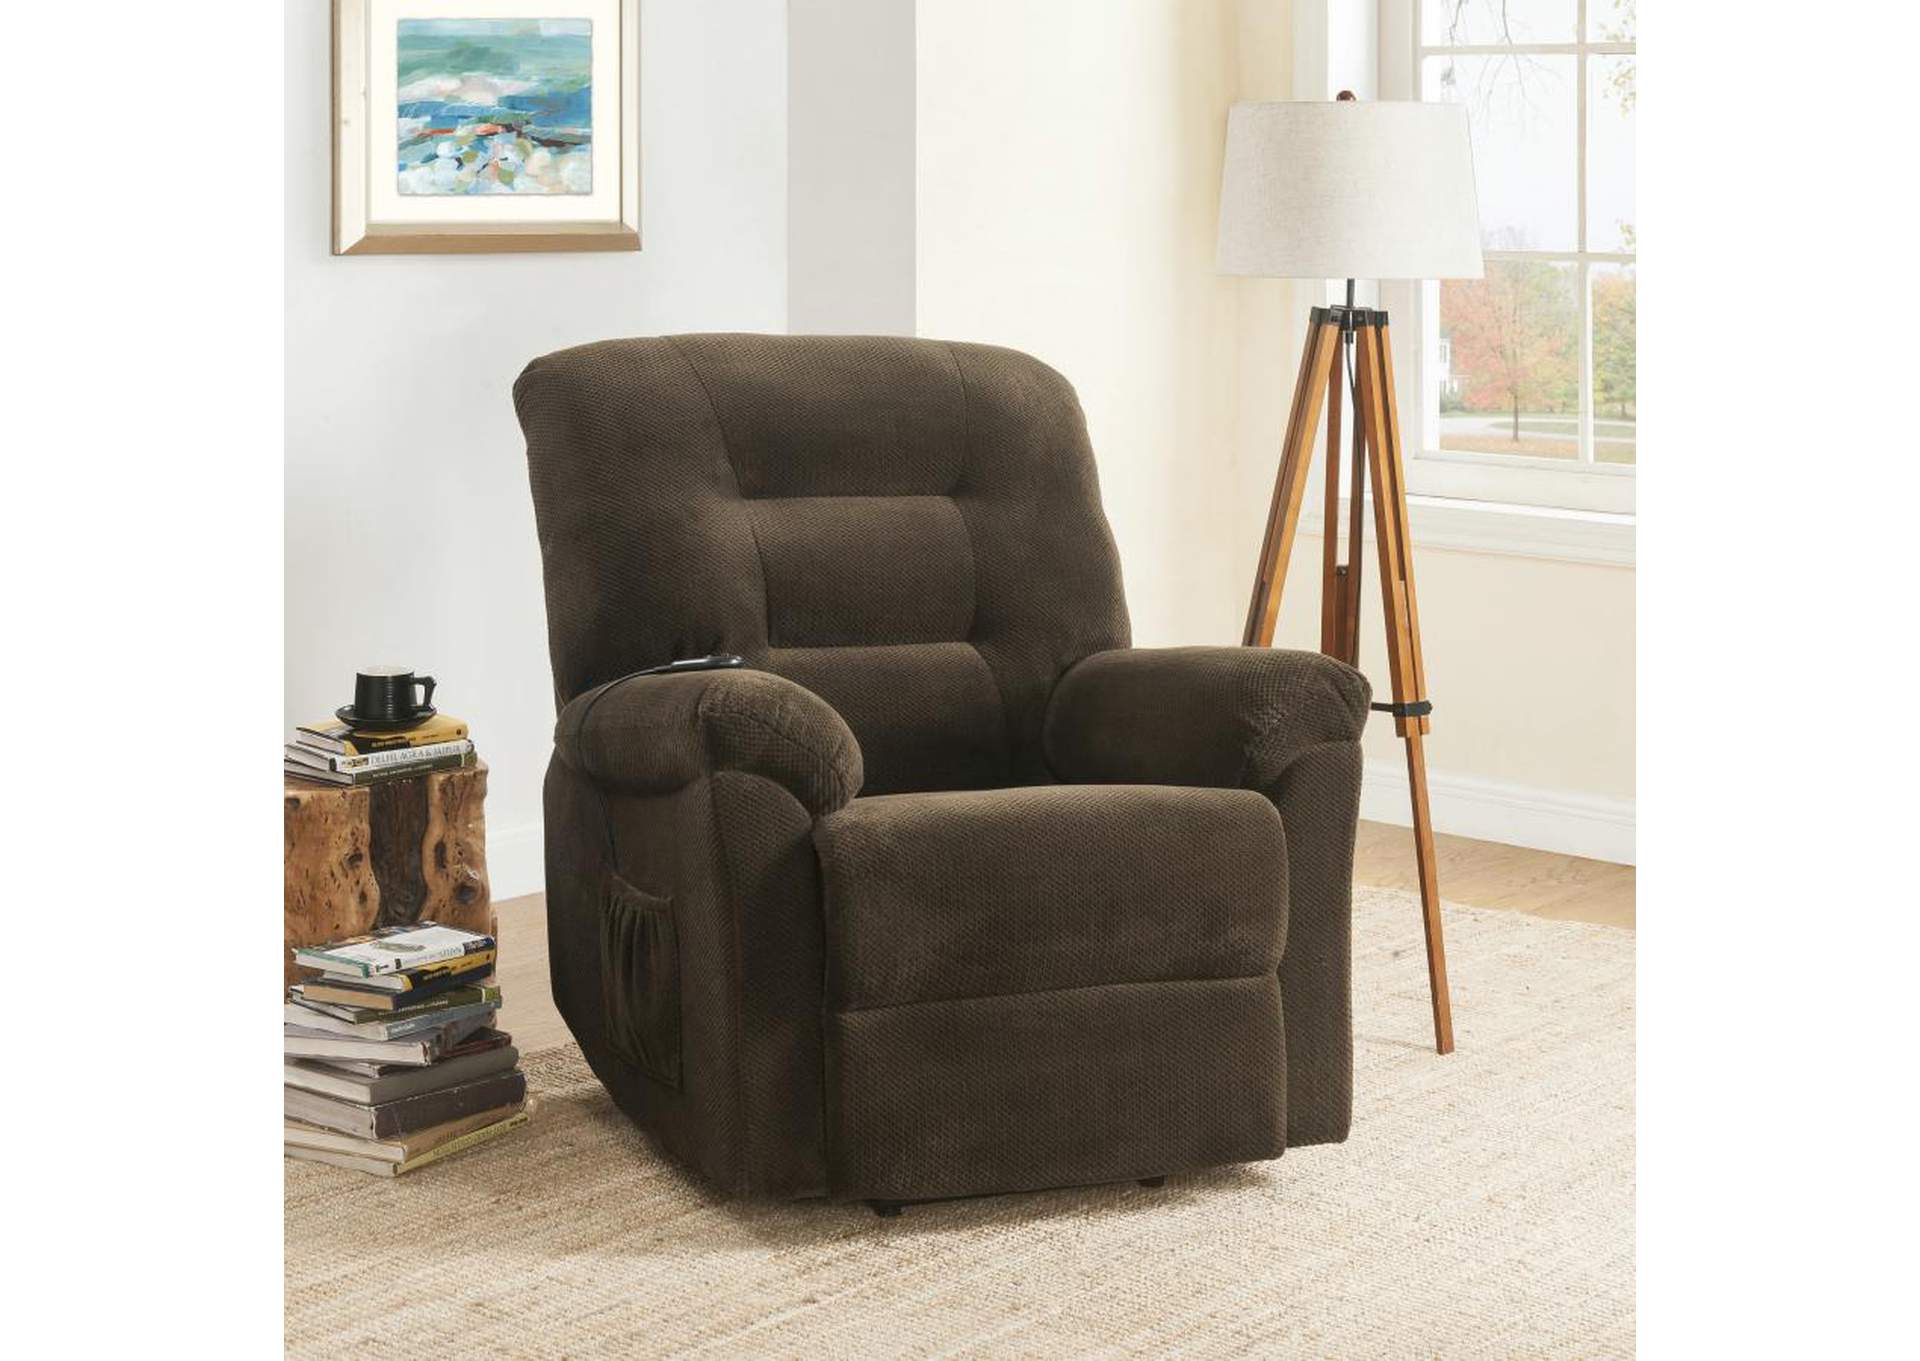 Upholstered Power Lift Recliner Chocolate,Coaster Furniture